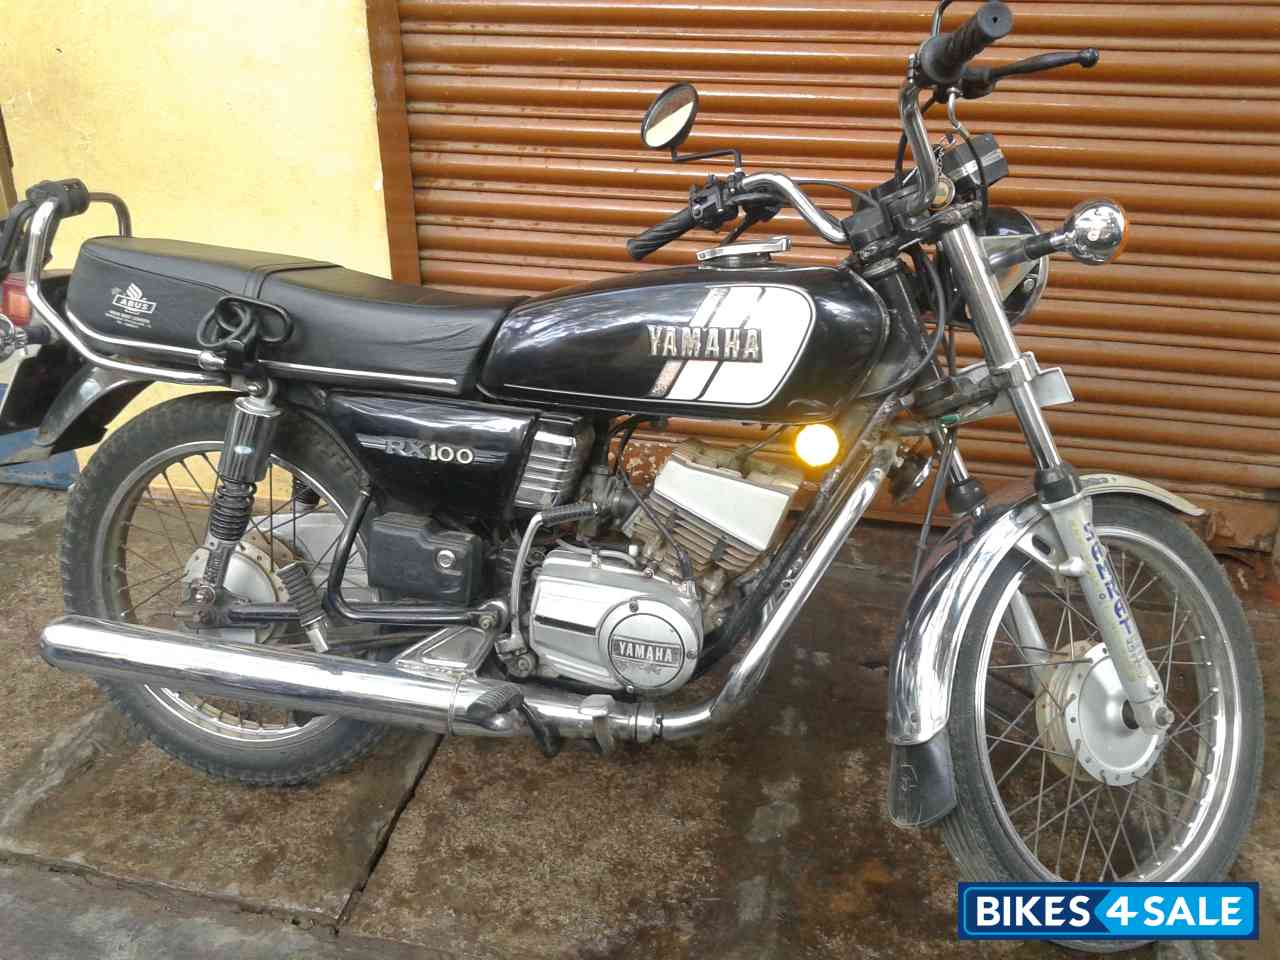 Used 1994 Model Yamaha Rx 100 For Sale In Bangalore Id 100463 Black Colour Bikes4sale